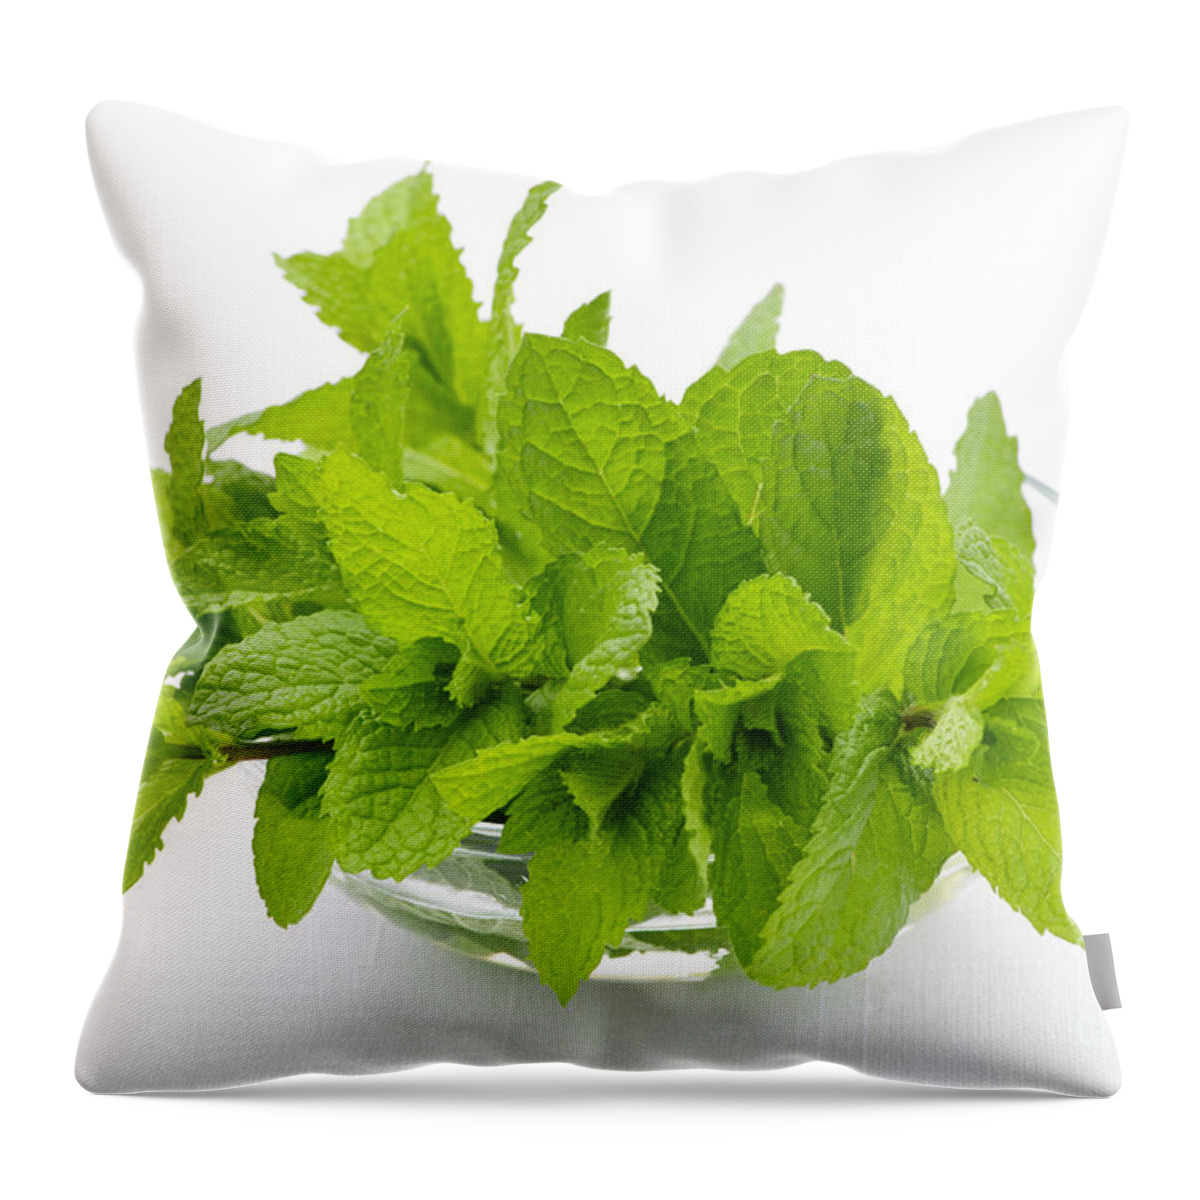 Mint Throw Pillow featuring the photograph Mint sprigs in bowl by Elena Elisseeva